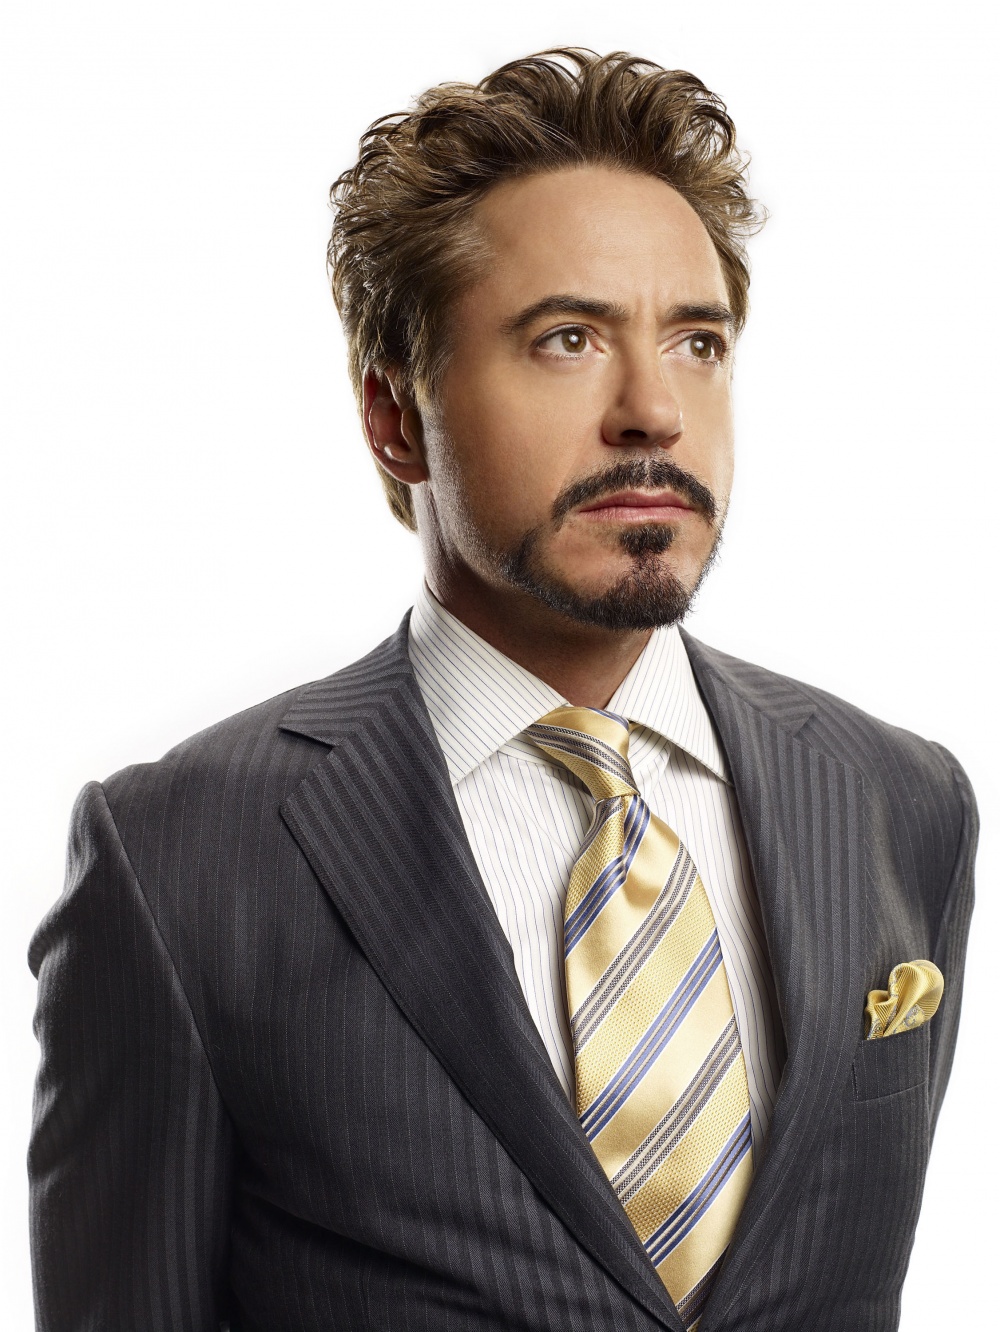 Tony Stark woke up in his bed in New York high-quality skin texture